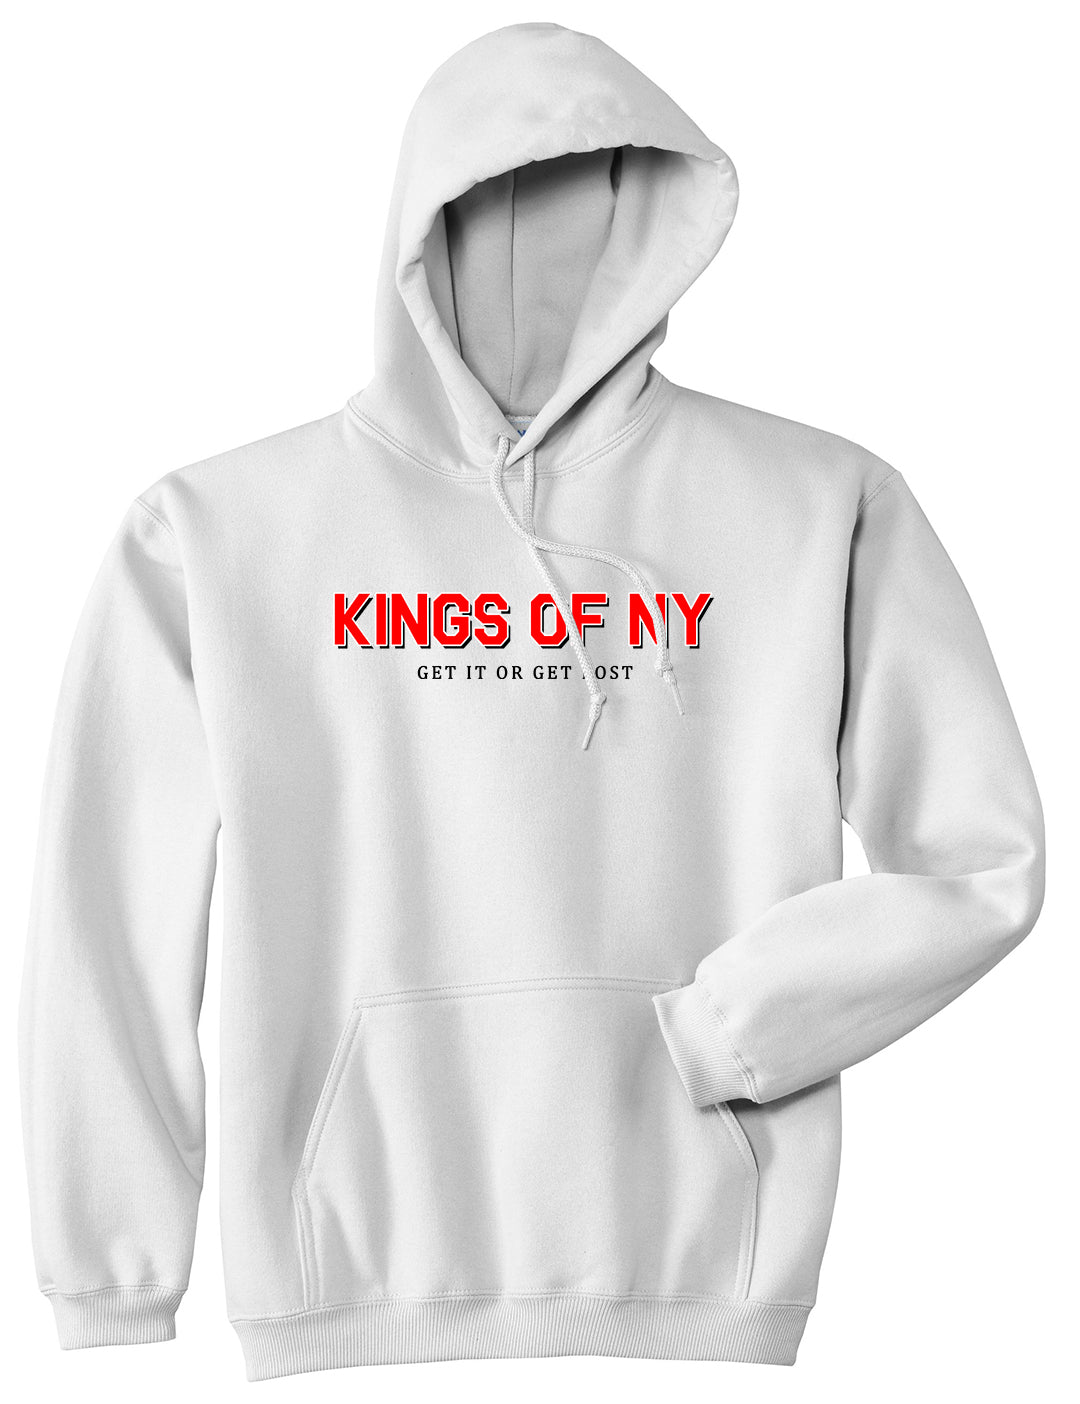 Get It Or Get Lost Mens Pullover Hoodie White by Kings Of NY